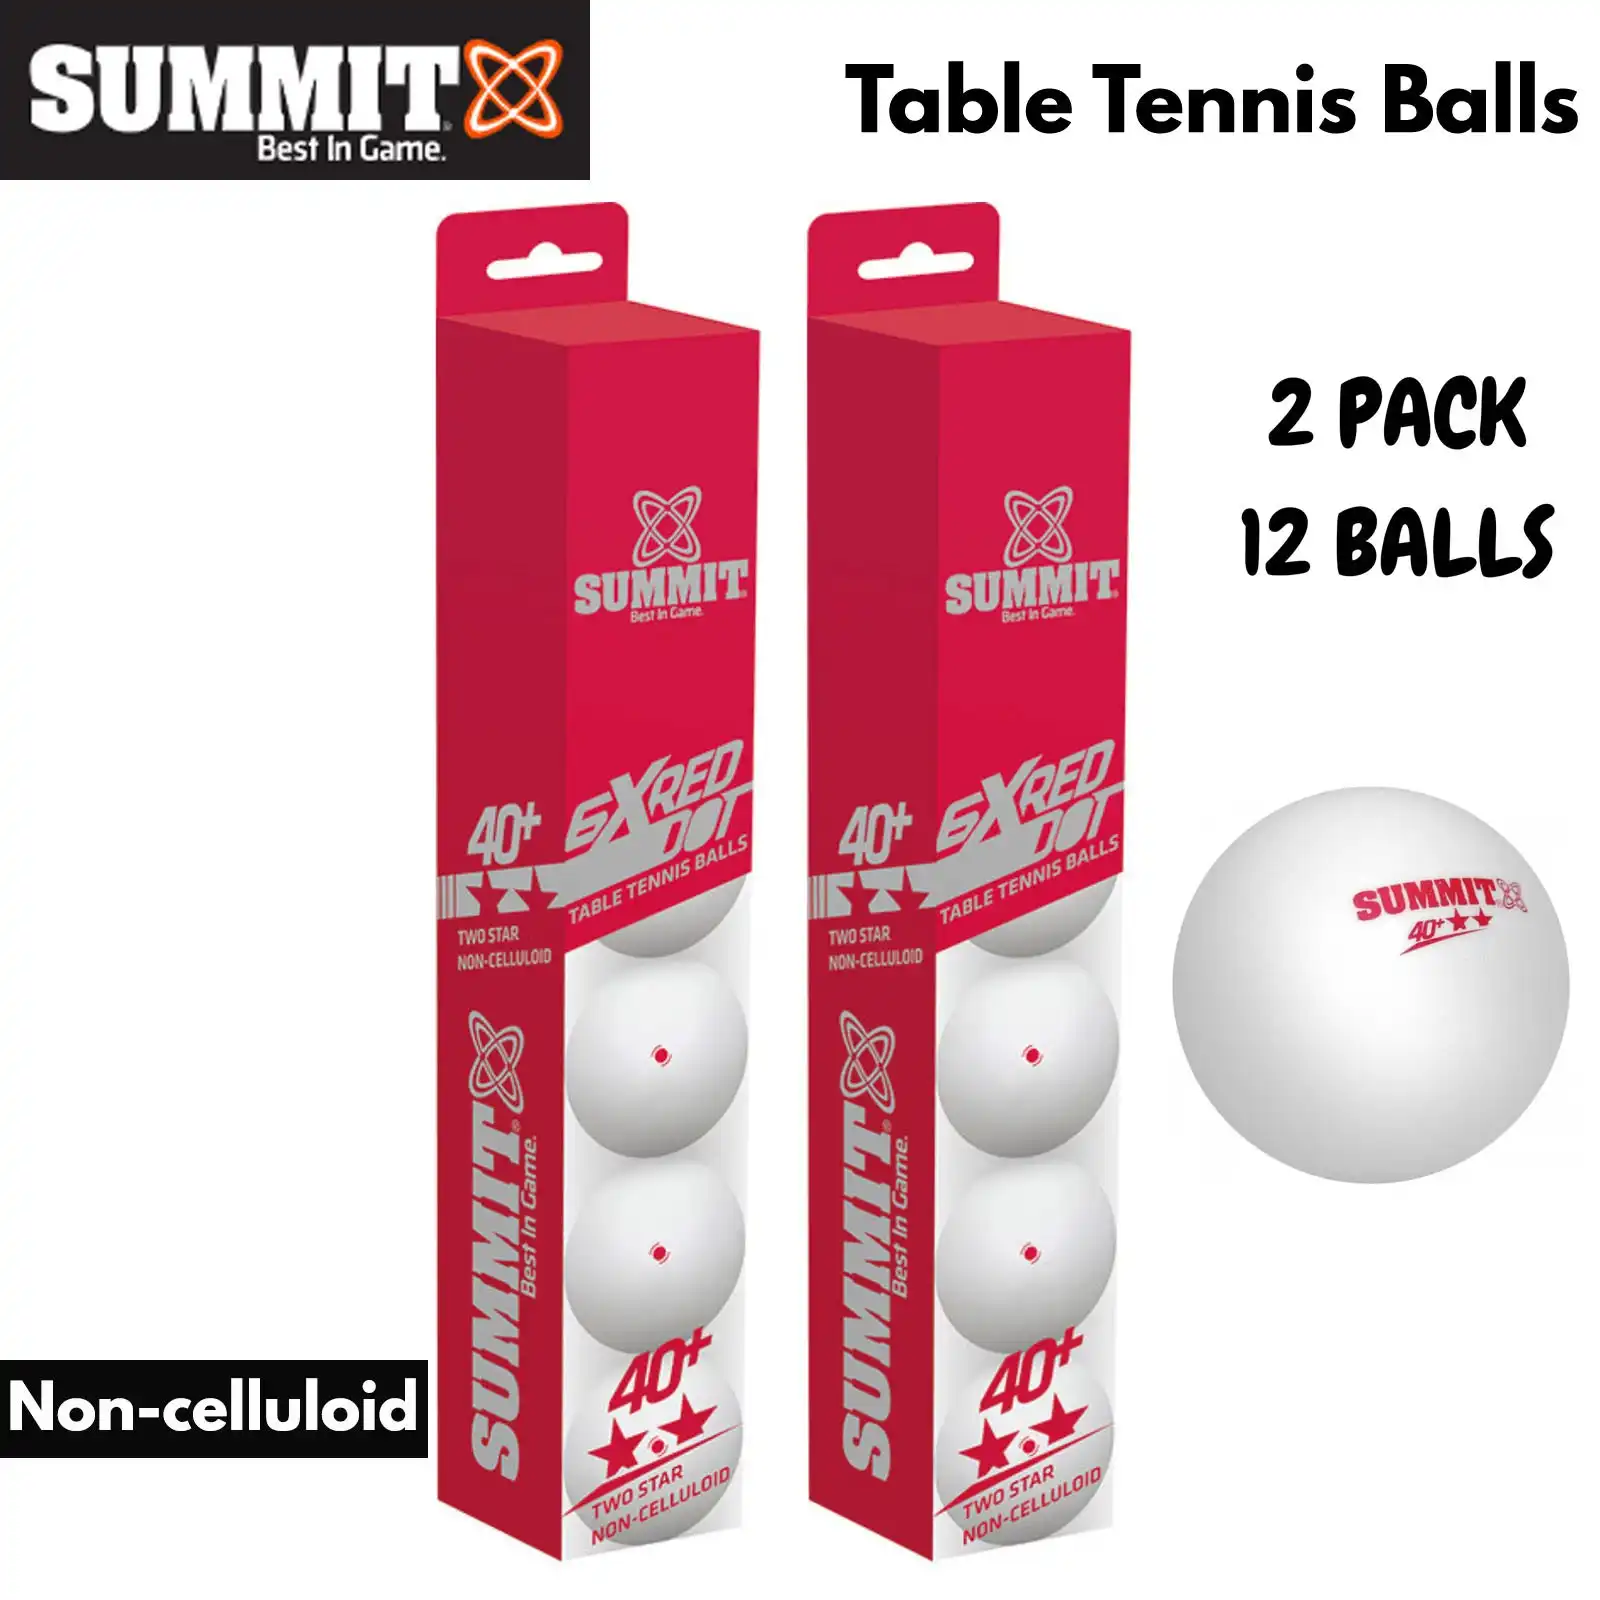 12x Table Tennis Balls 40+ Ping Pong Game Non-Celluloid - 2 Star Red Dot